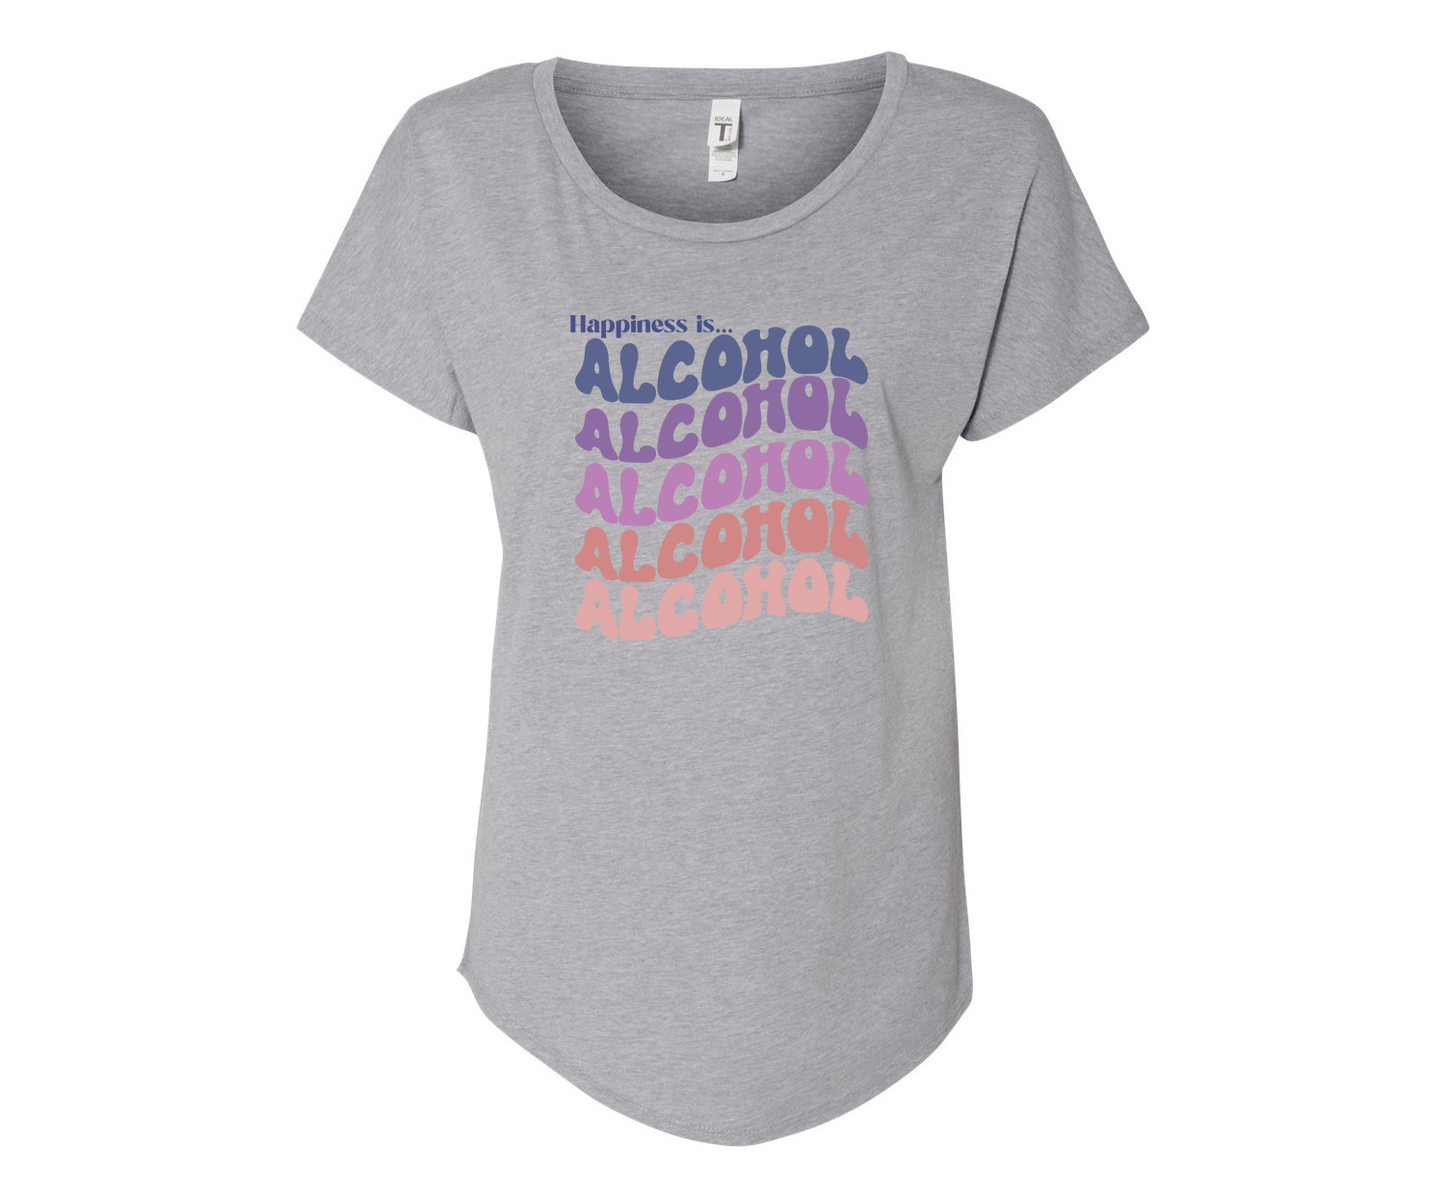 Happiness is Alcohol Ladies Tee Shirt - In White & Grey